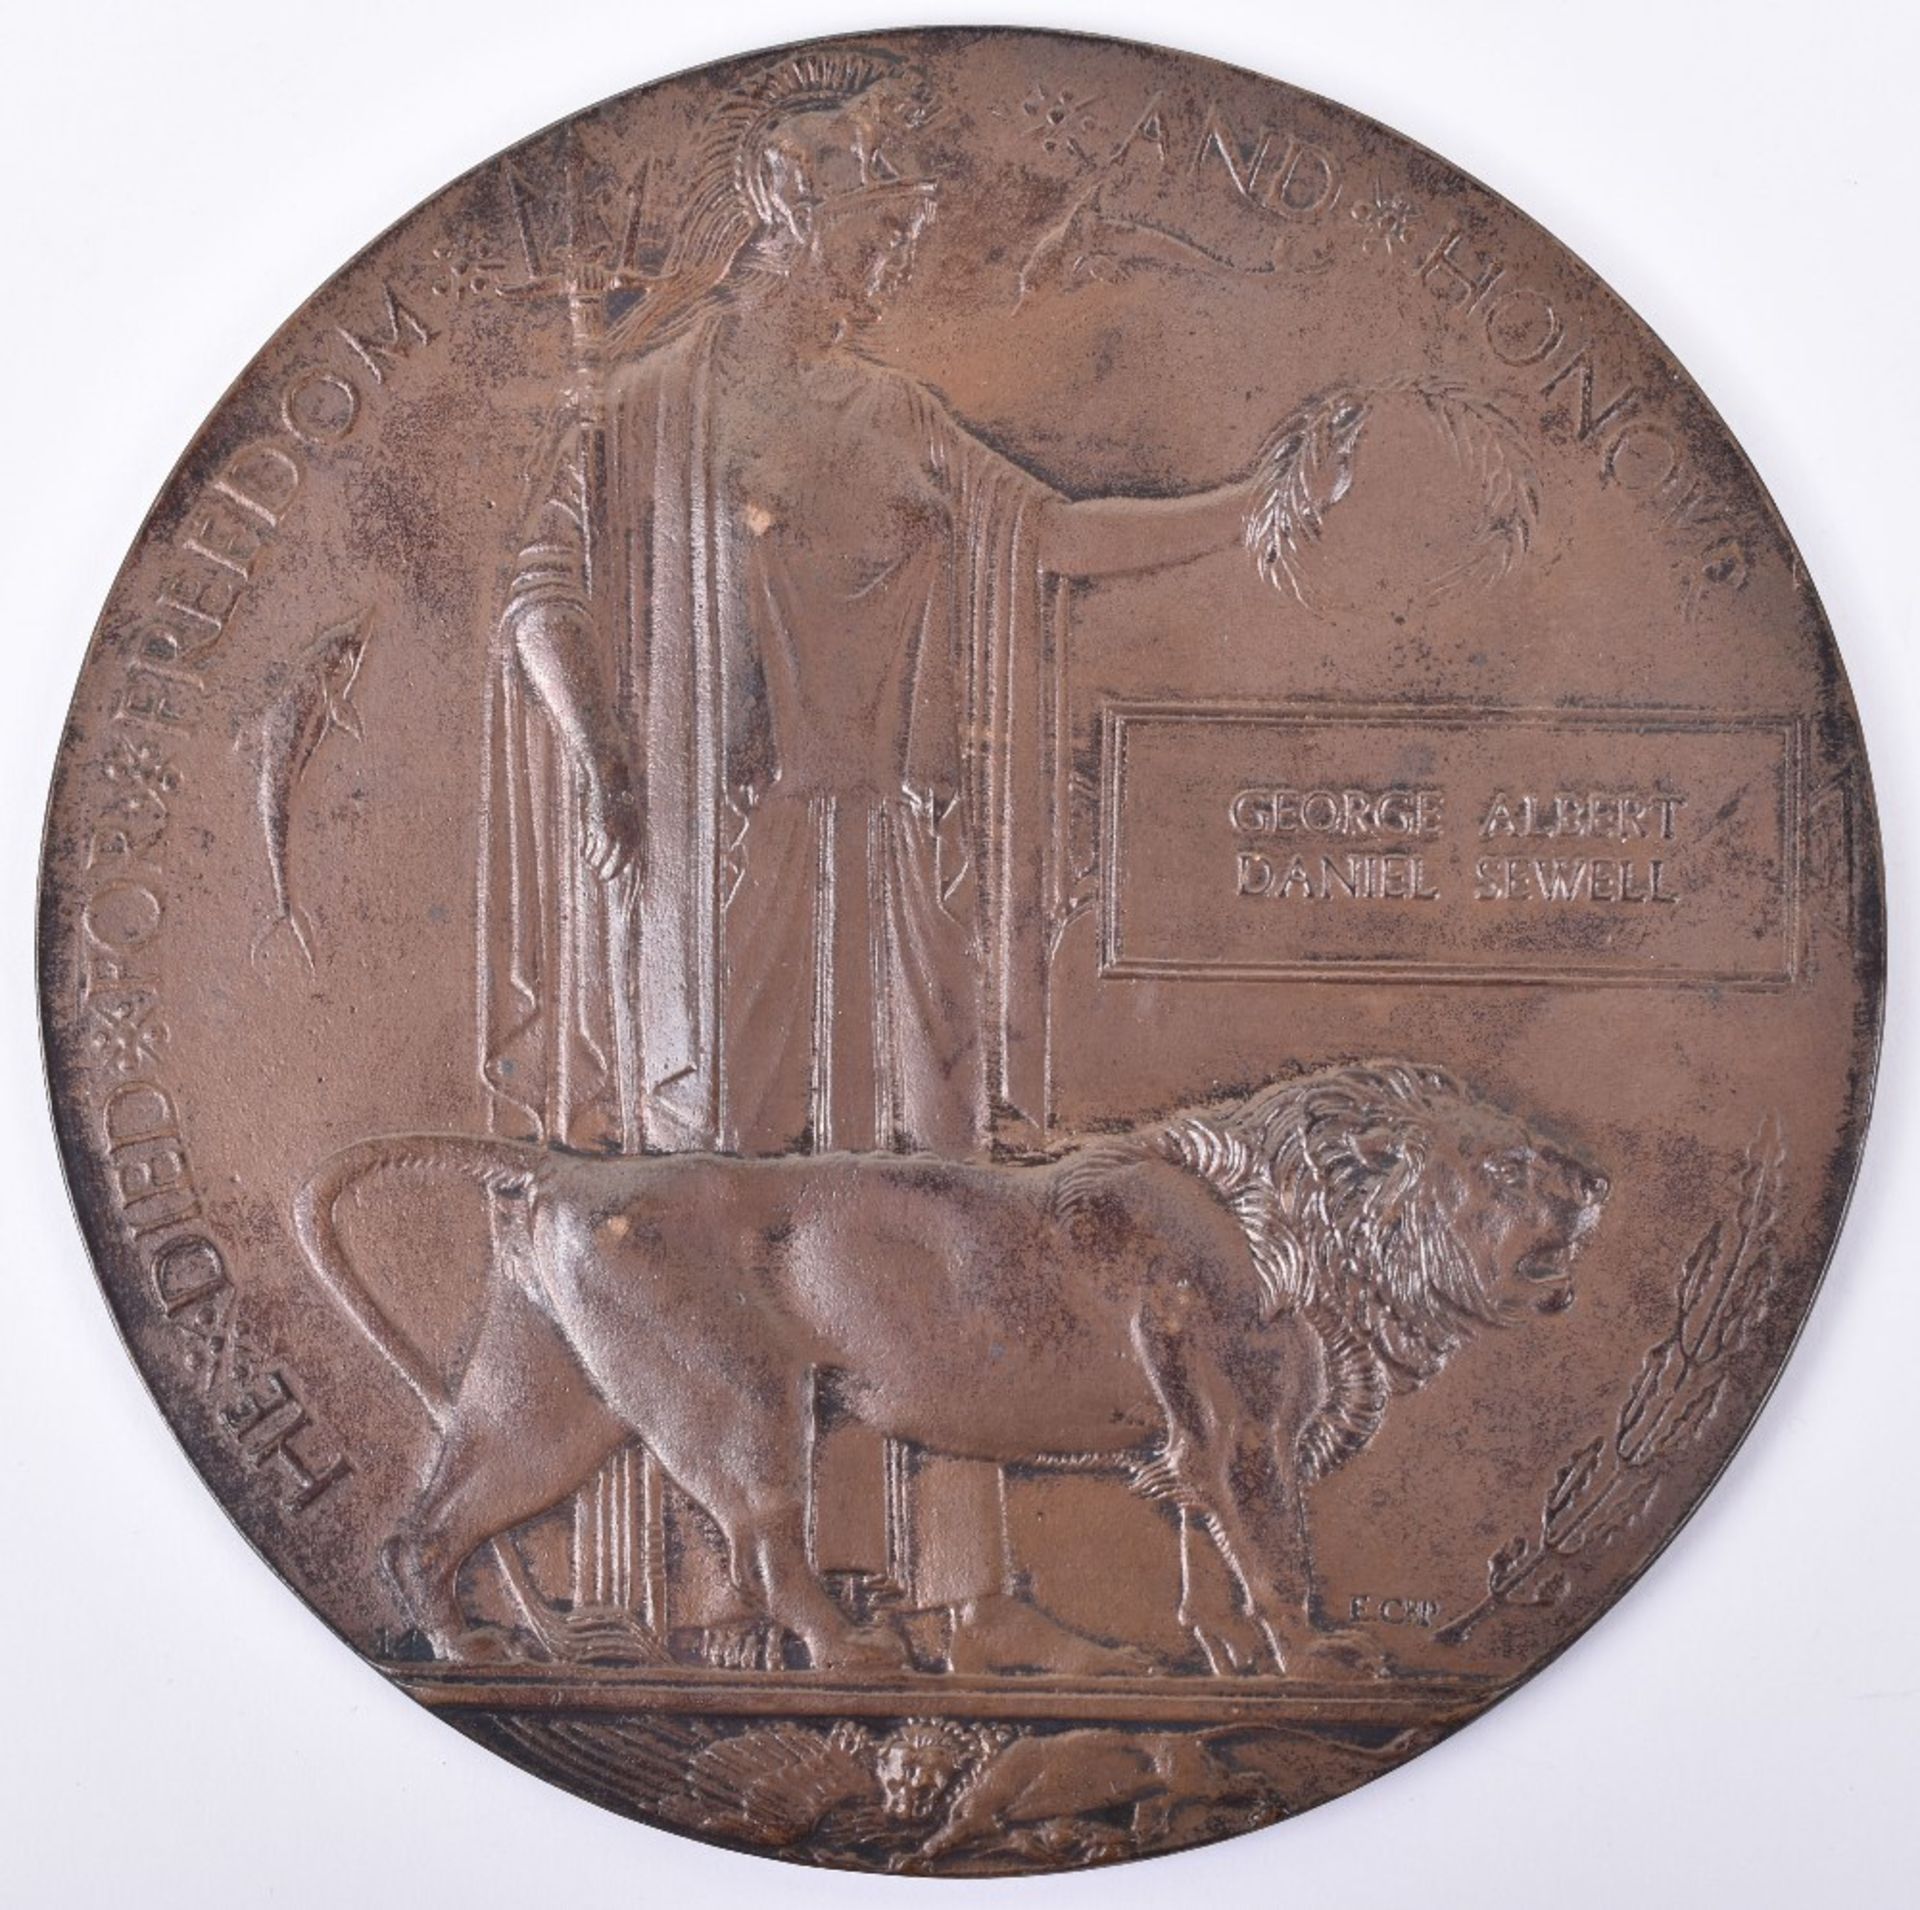 Great War Third Battle of Gaza Casualty Medal Group 10th London Regiment - Image 8 of 9